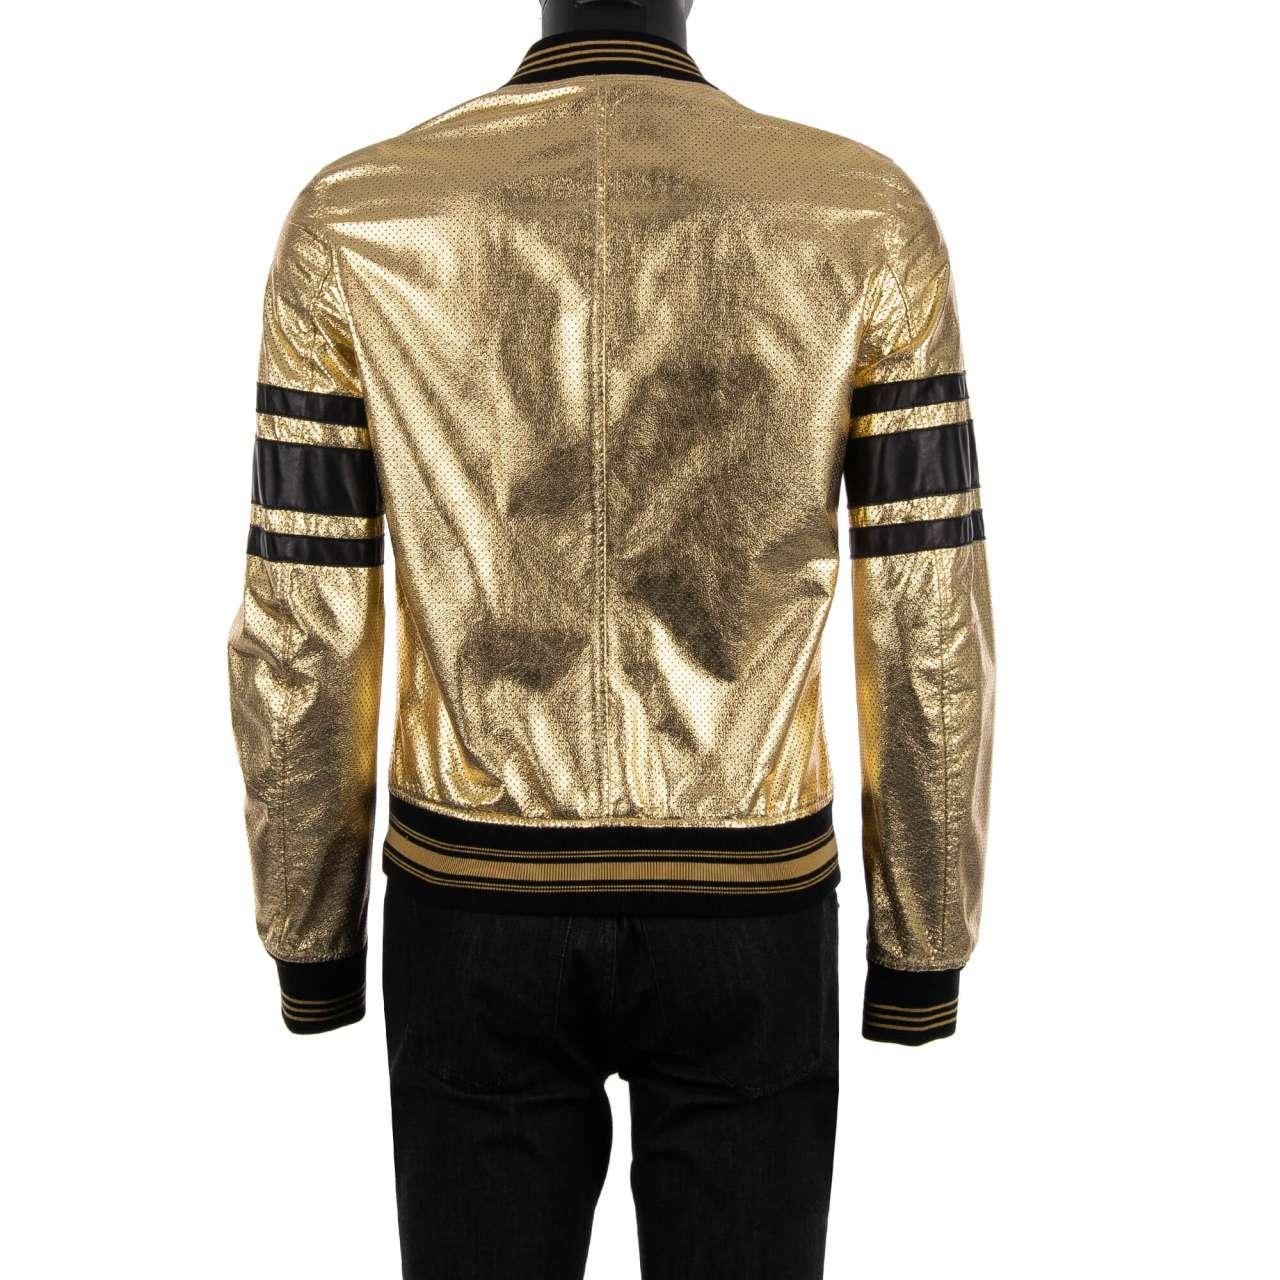 Dolce & Gabbana Perforated Leather Jacket Gold Black 46 For Sale 1